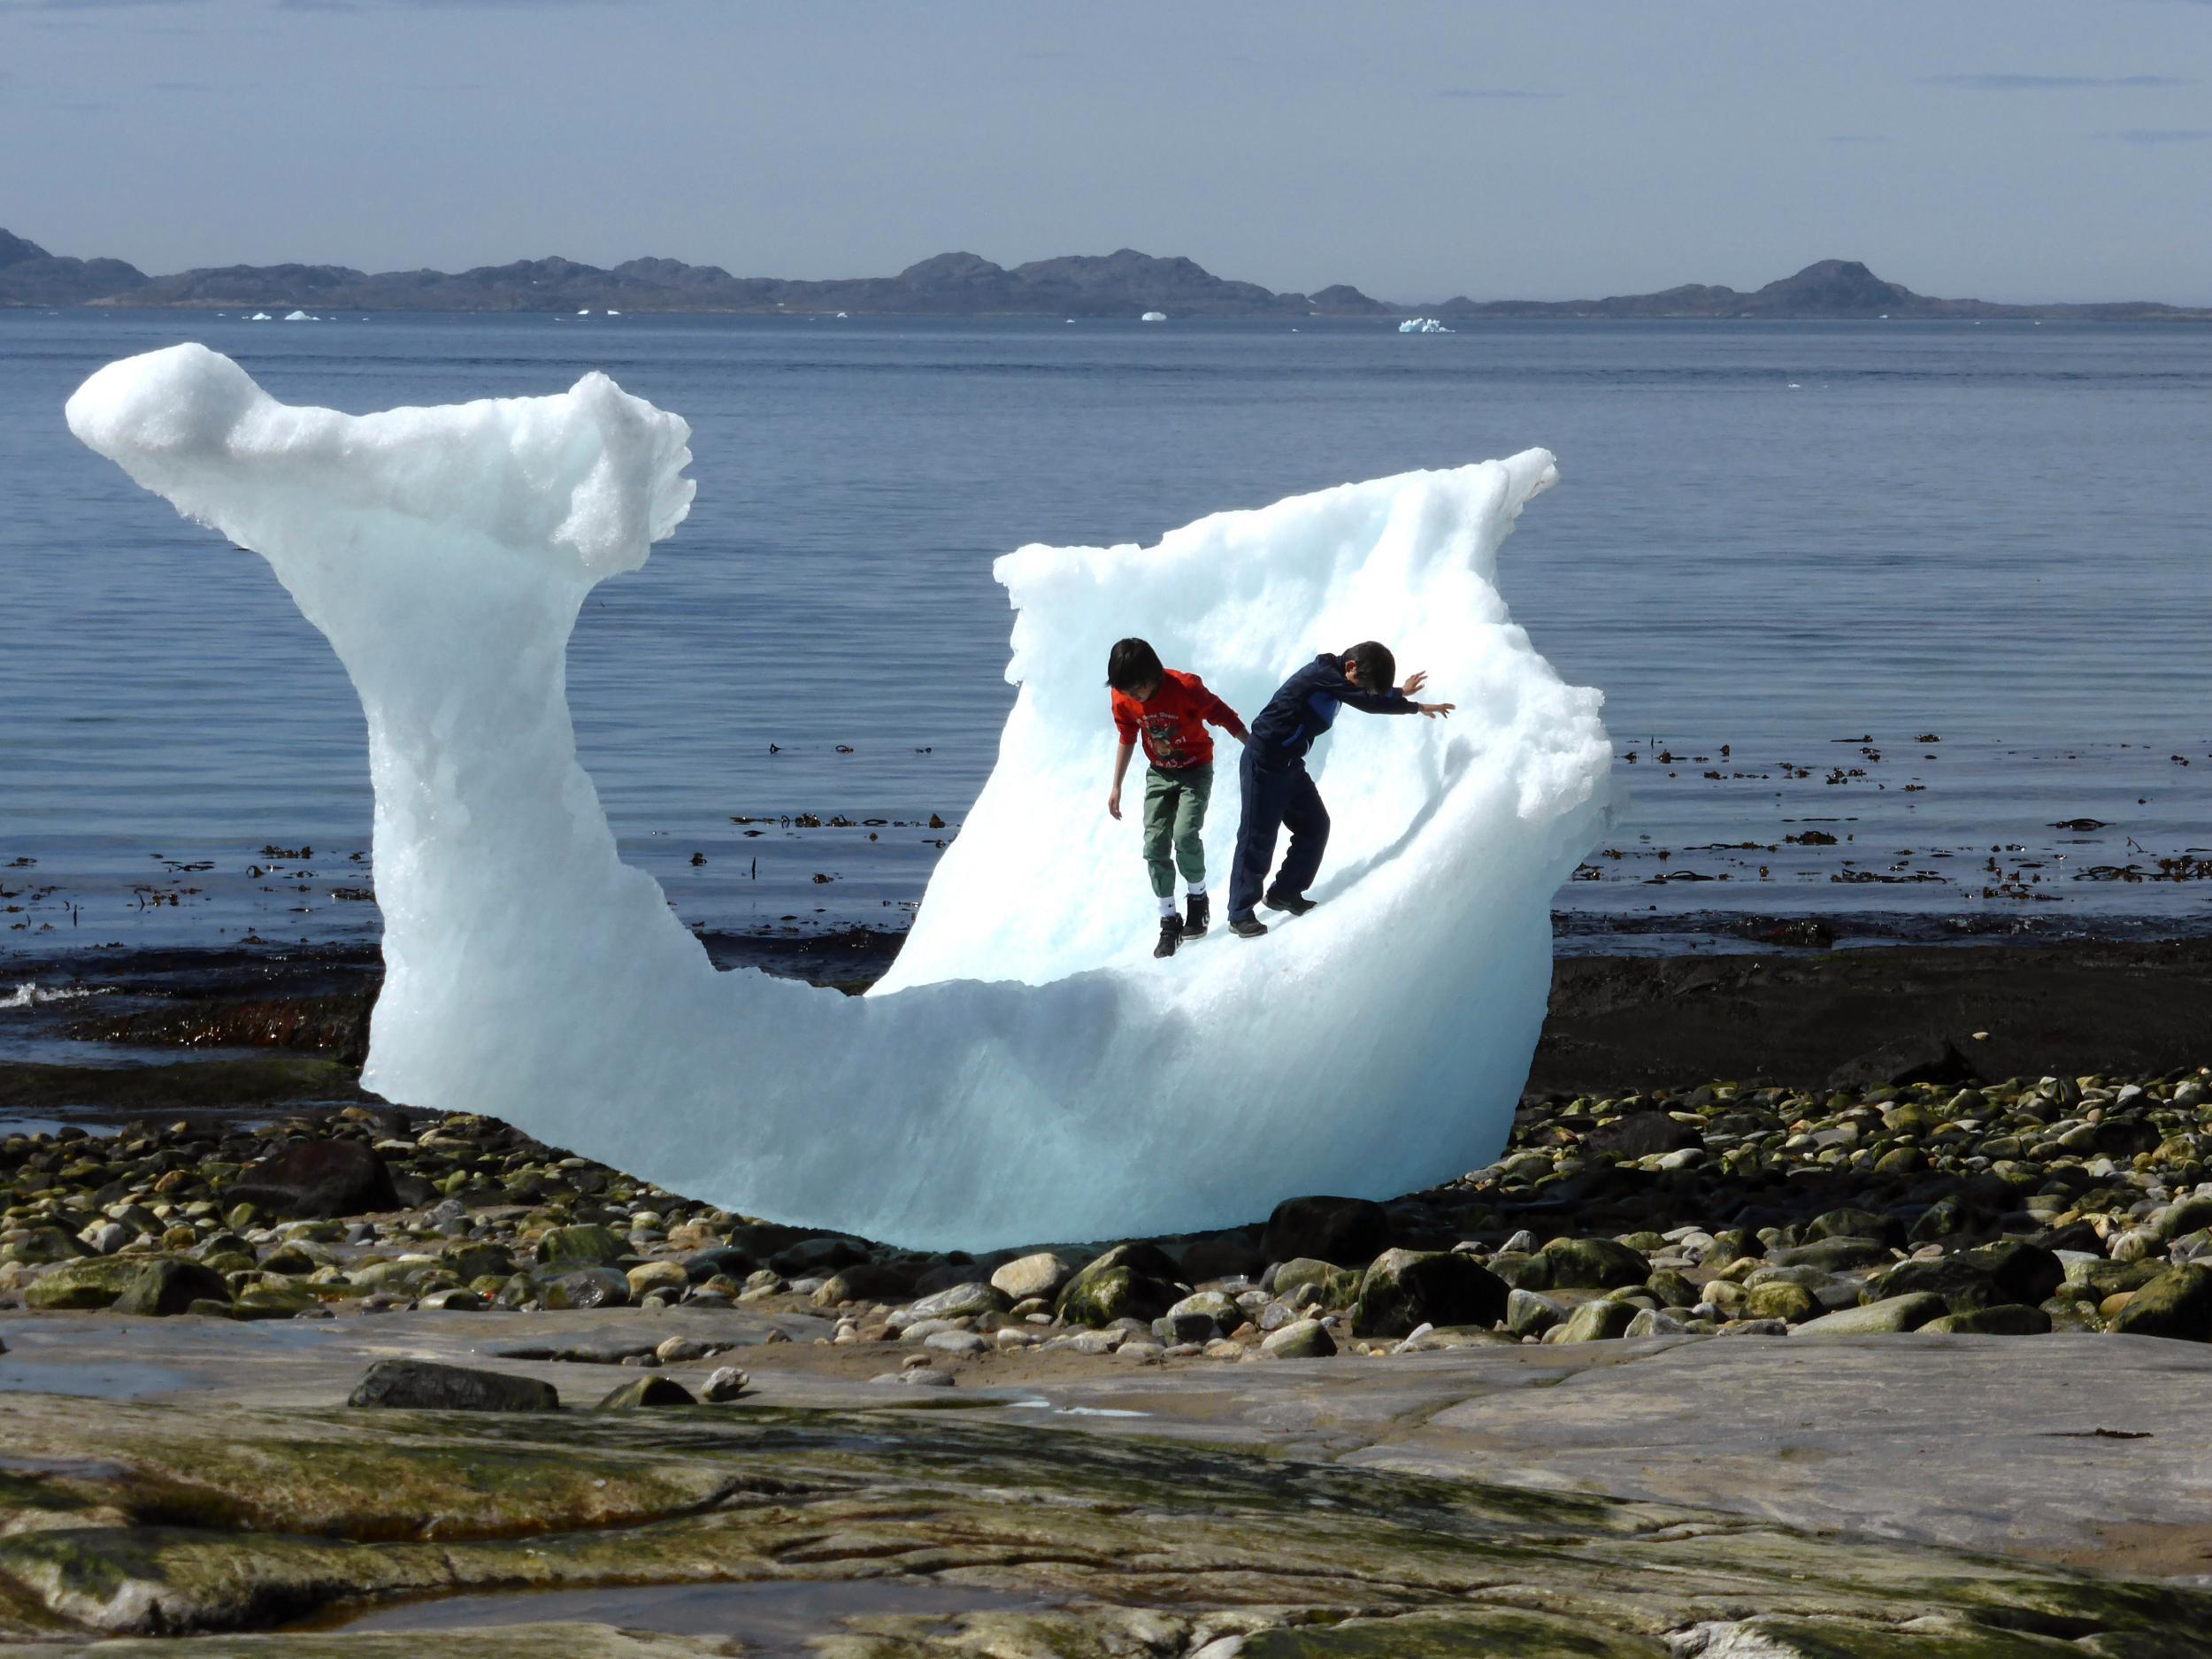 Children play on the remains of a stranded iceberg on a beach in Nuuk, Greenland